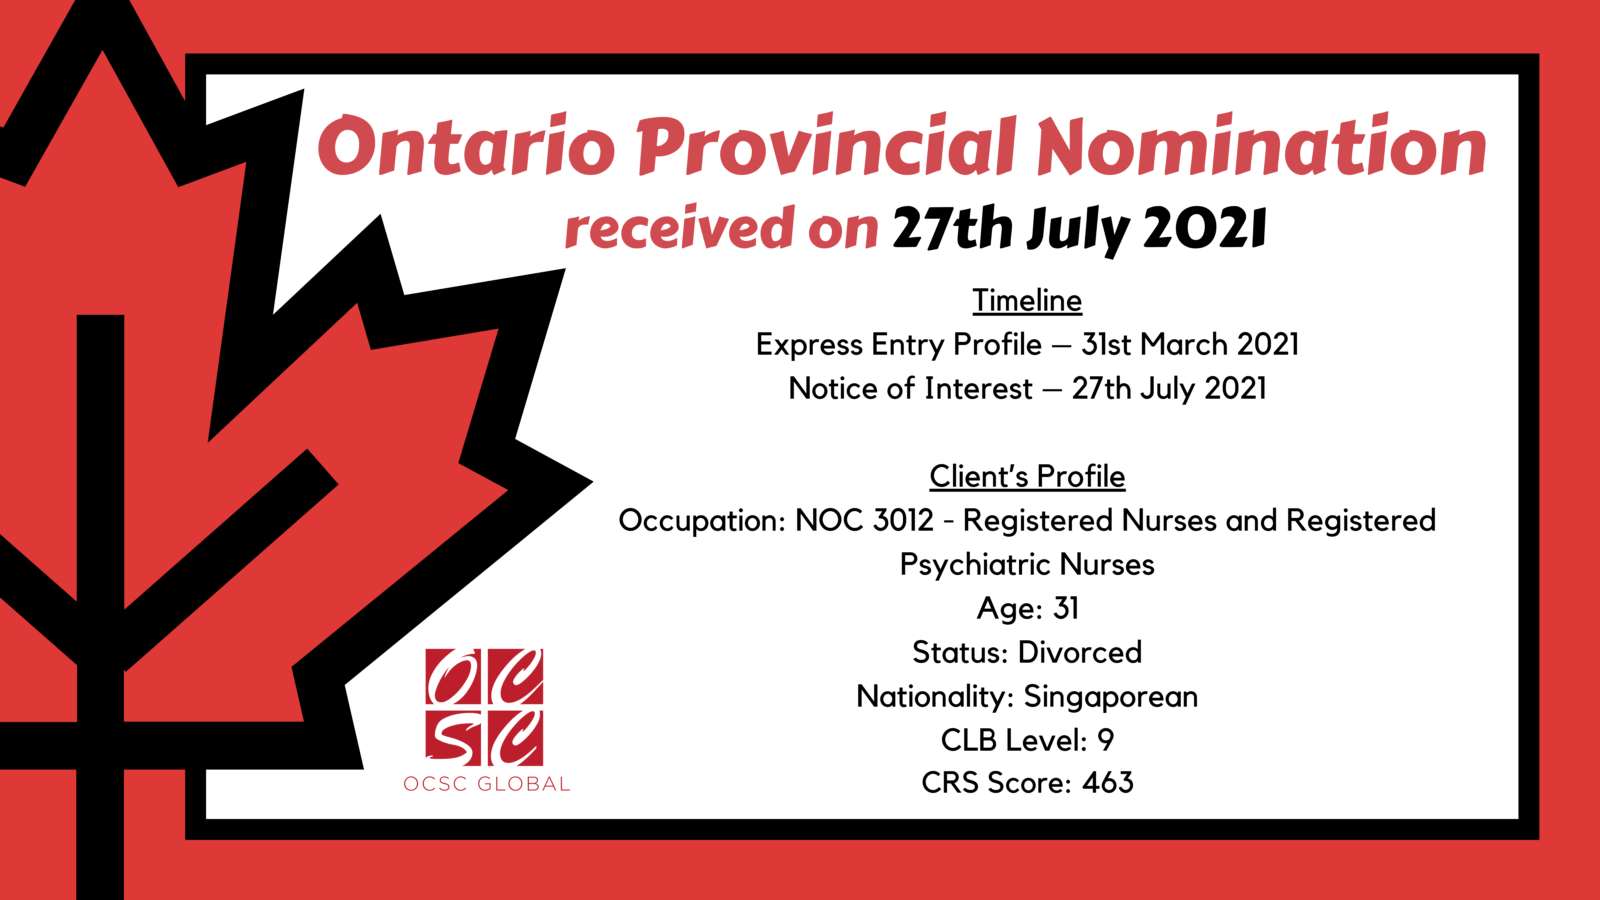 New Provincial Nomination from Ontario